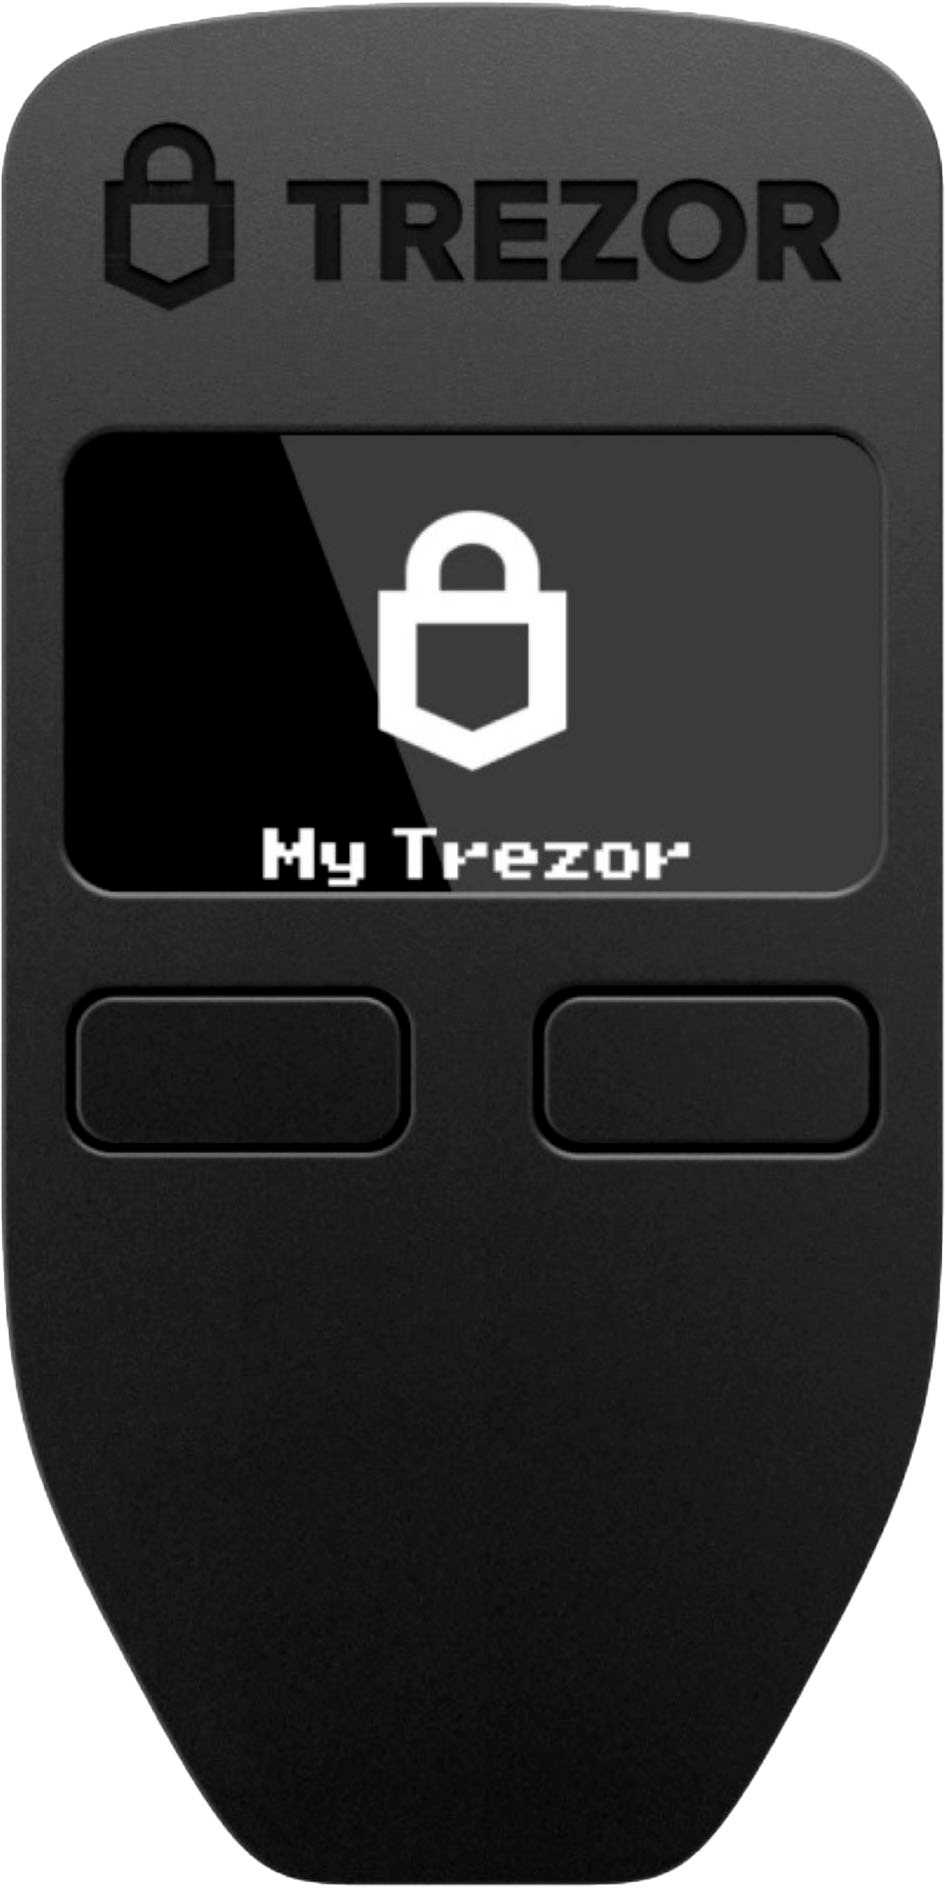 Instructions for Installing and Configuring Your Trezor Wallet